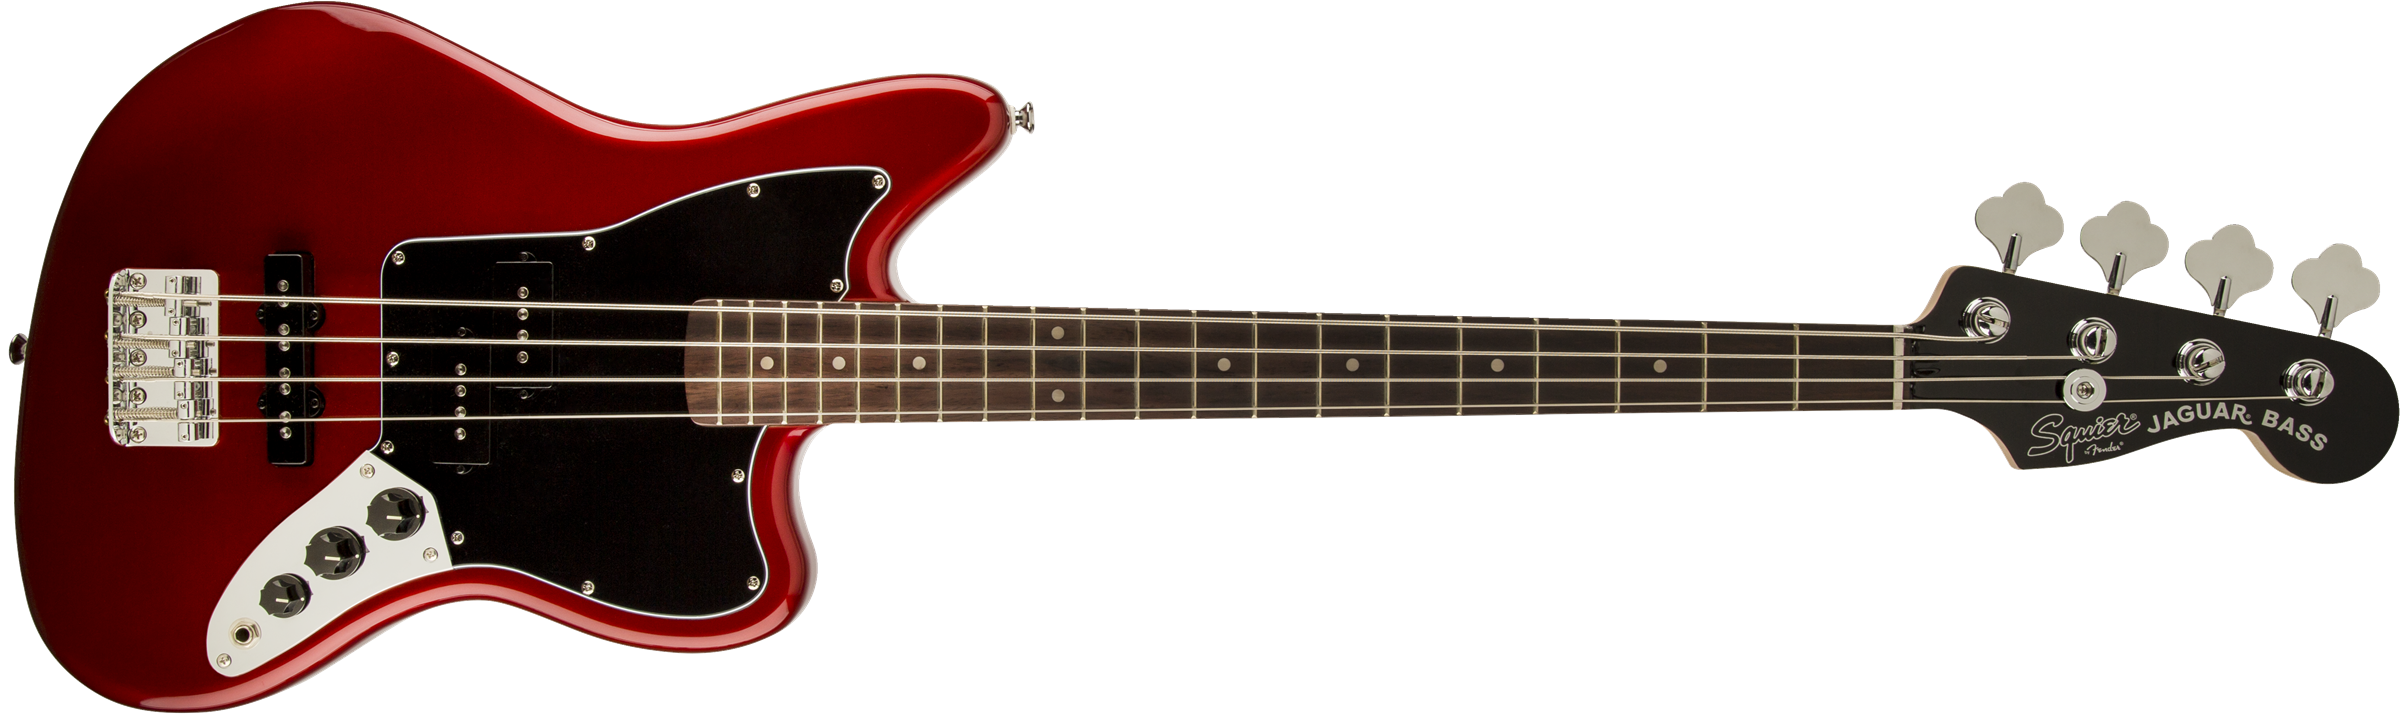 Vintage Modified Jaguar® Bass Special SS, Rosewood Fingerboard, Candy Apple Red